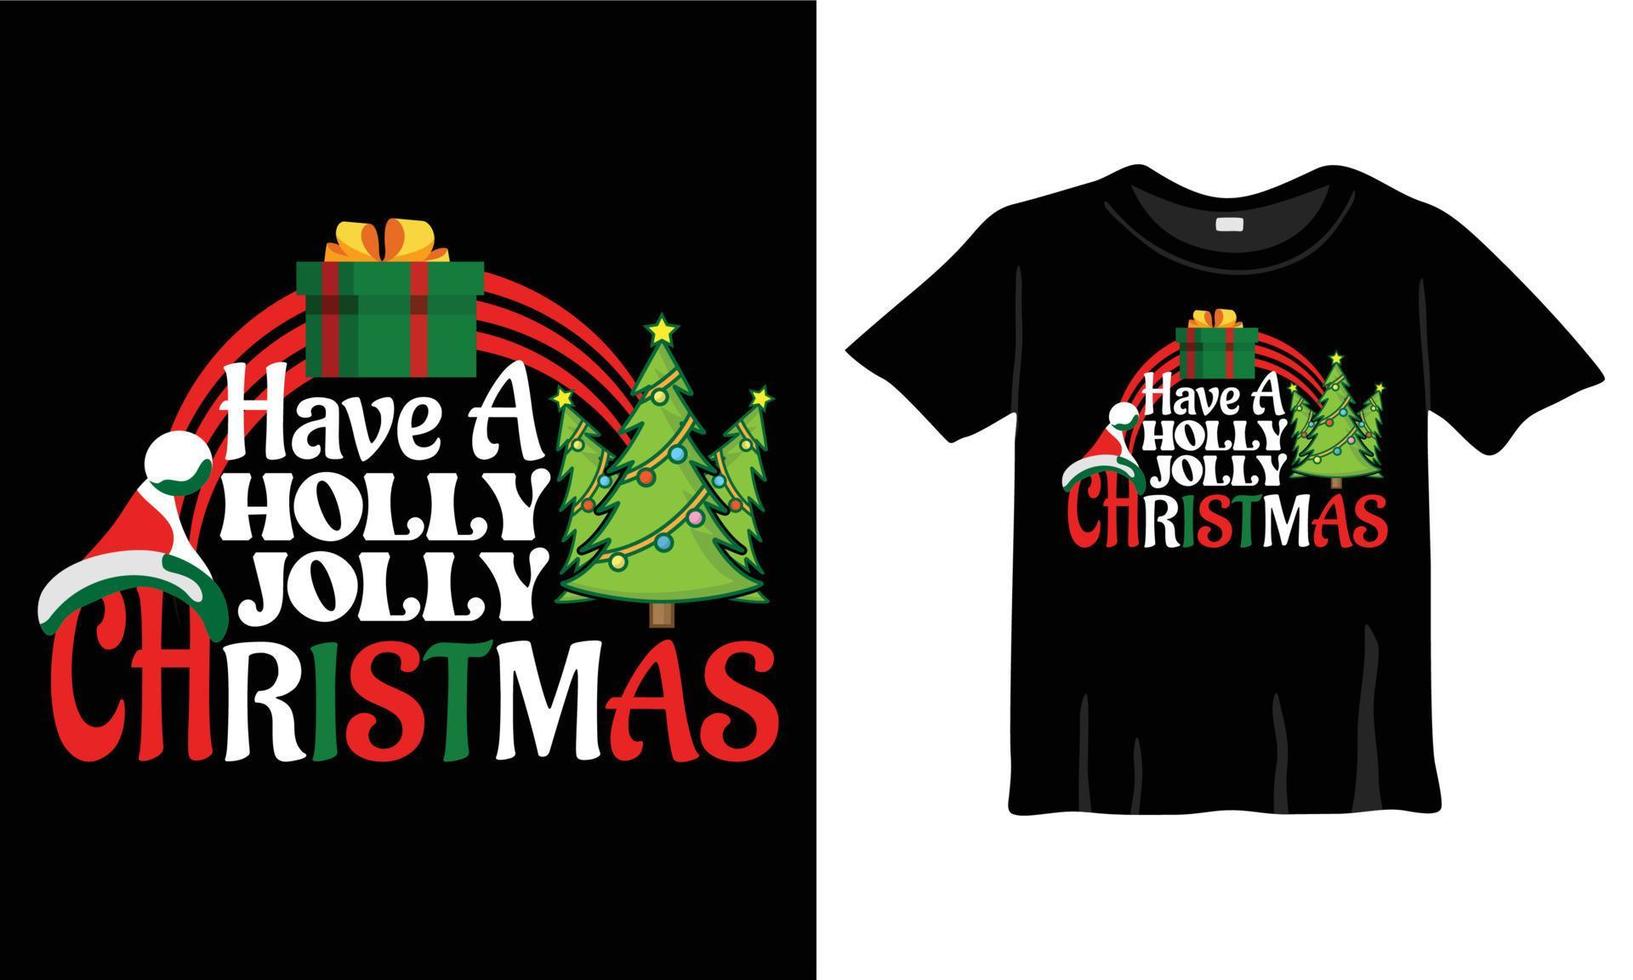 Have a holly jolly Christmas T-Shirt Design Template for Christmas Celebration. Good for Greeting cards, t-shirts, mugs, and gifts. For Men, Women, and Baby clothing vector